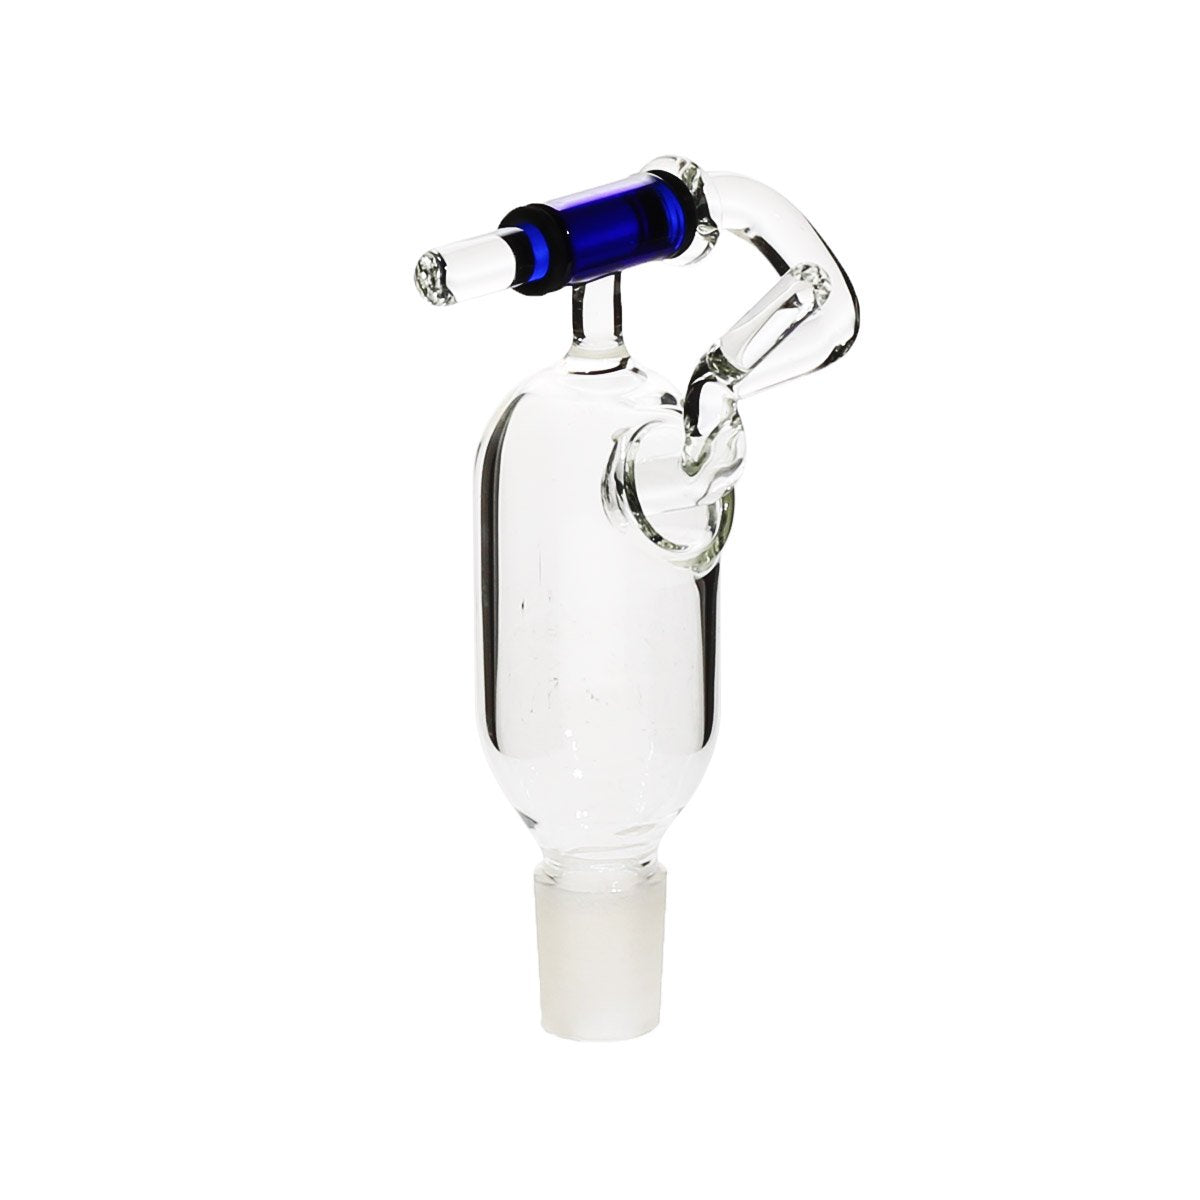 19Mm Smasher Concentrate Bowl - Blue Accessories